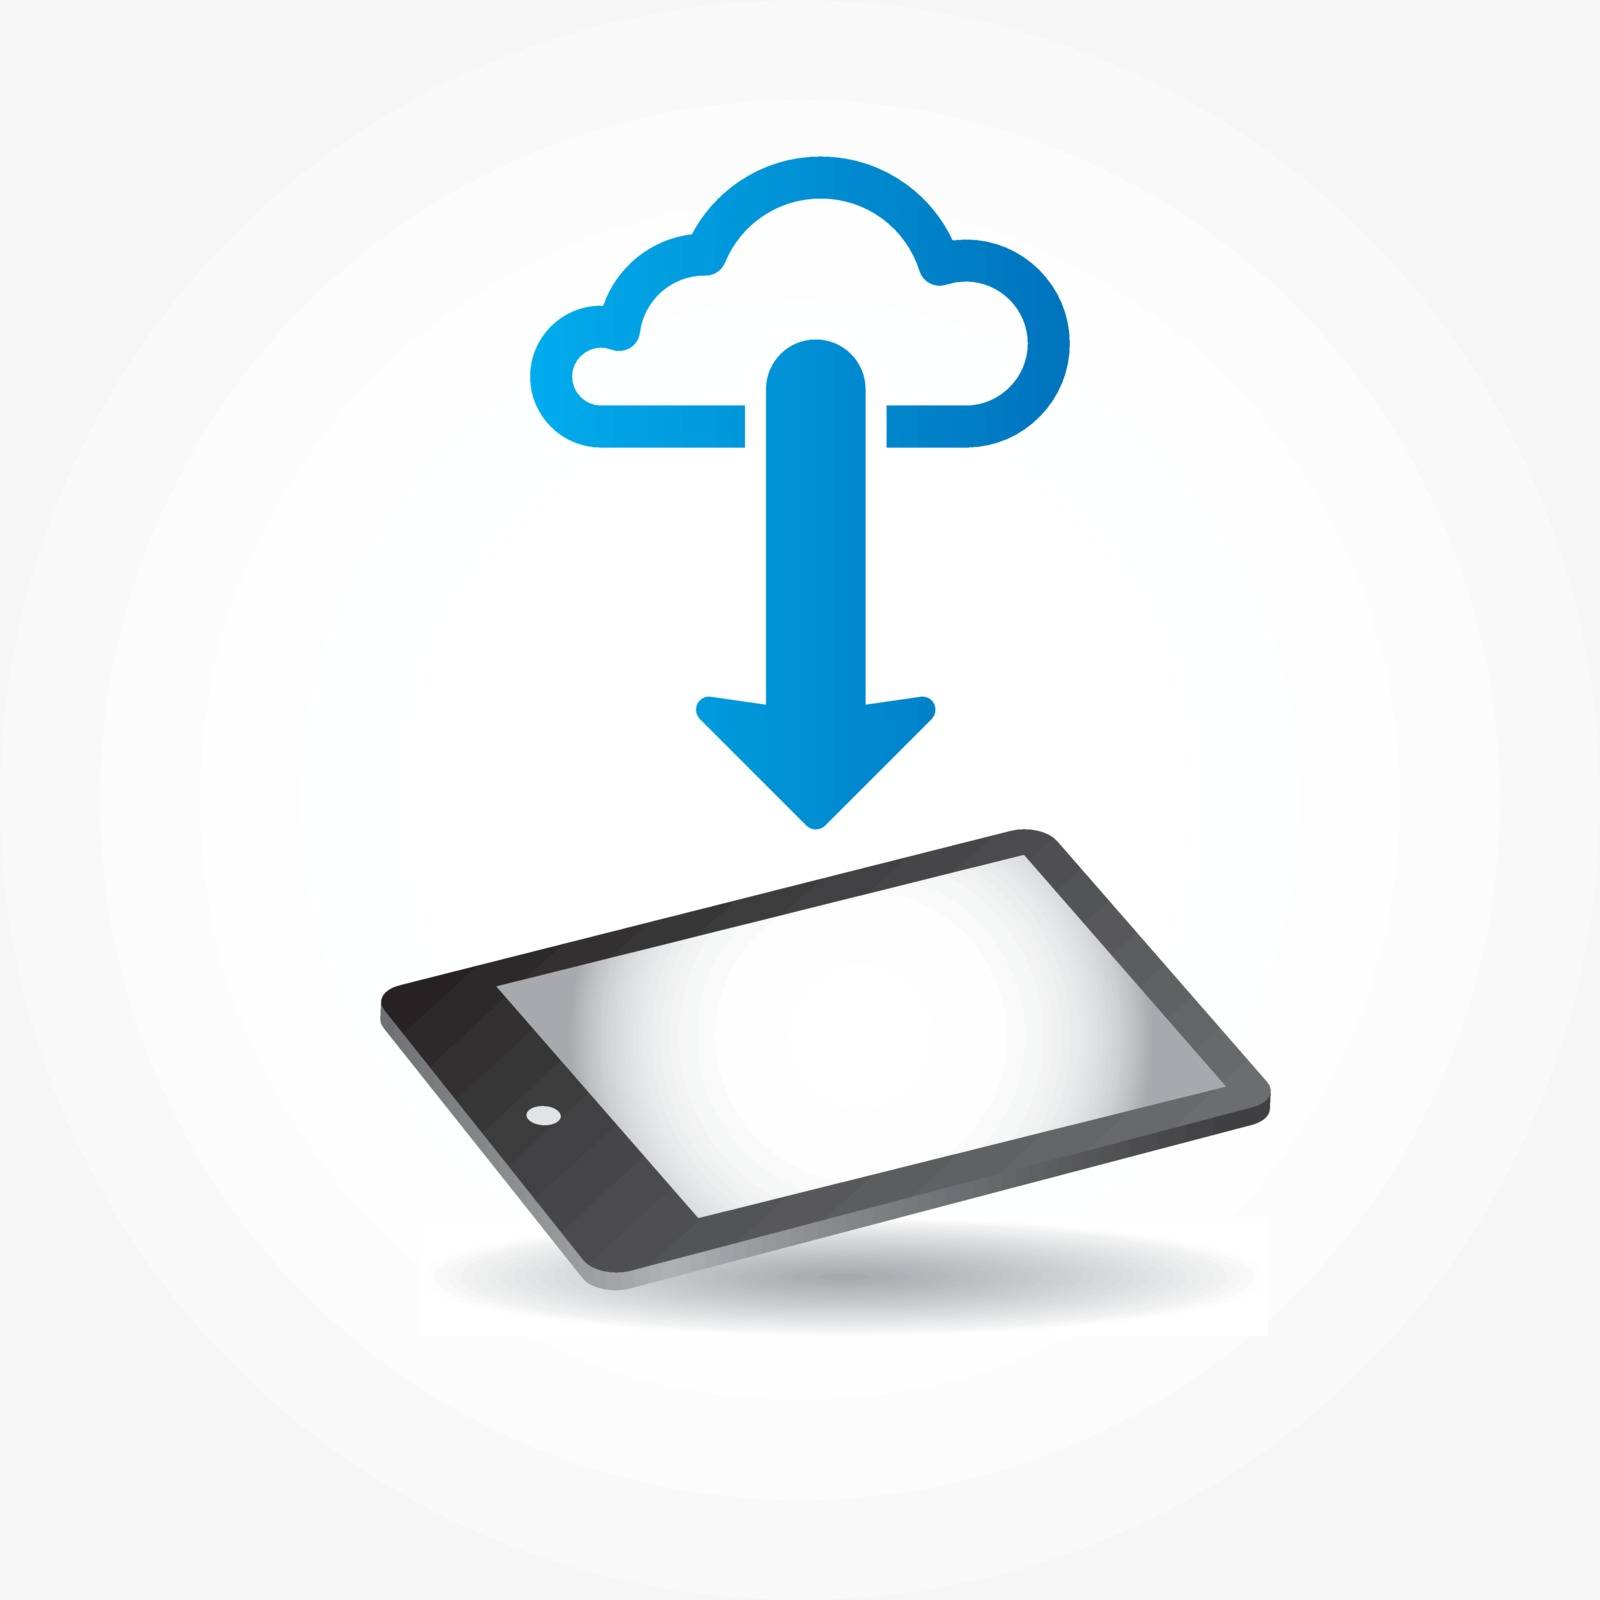 cloud app icon on mobile phone vector icons by alvaroc